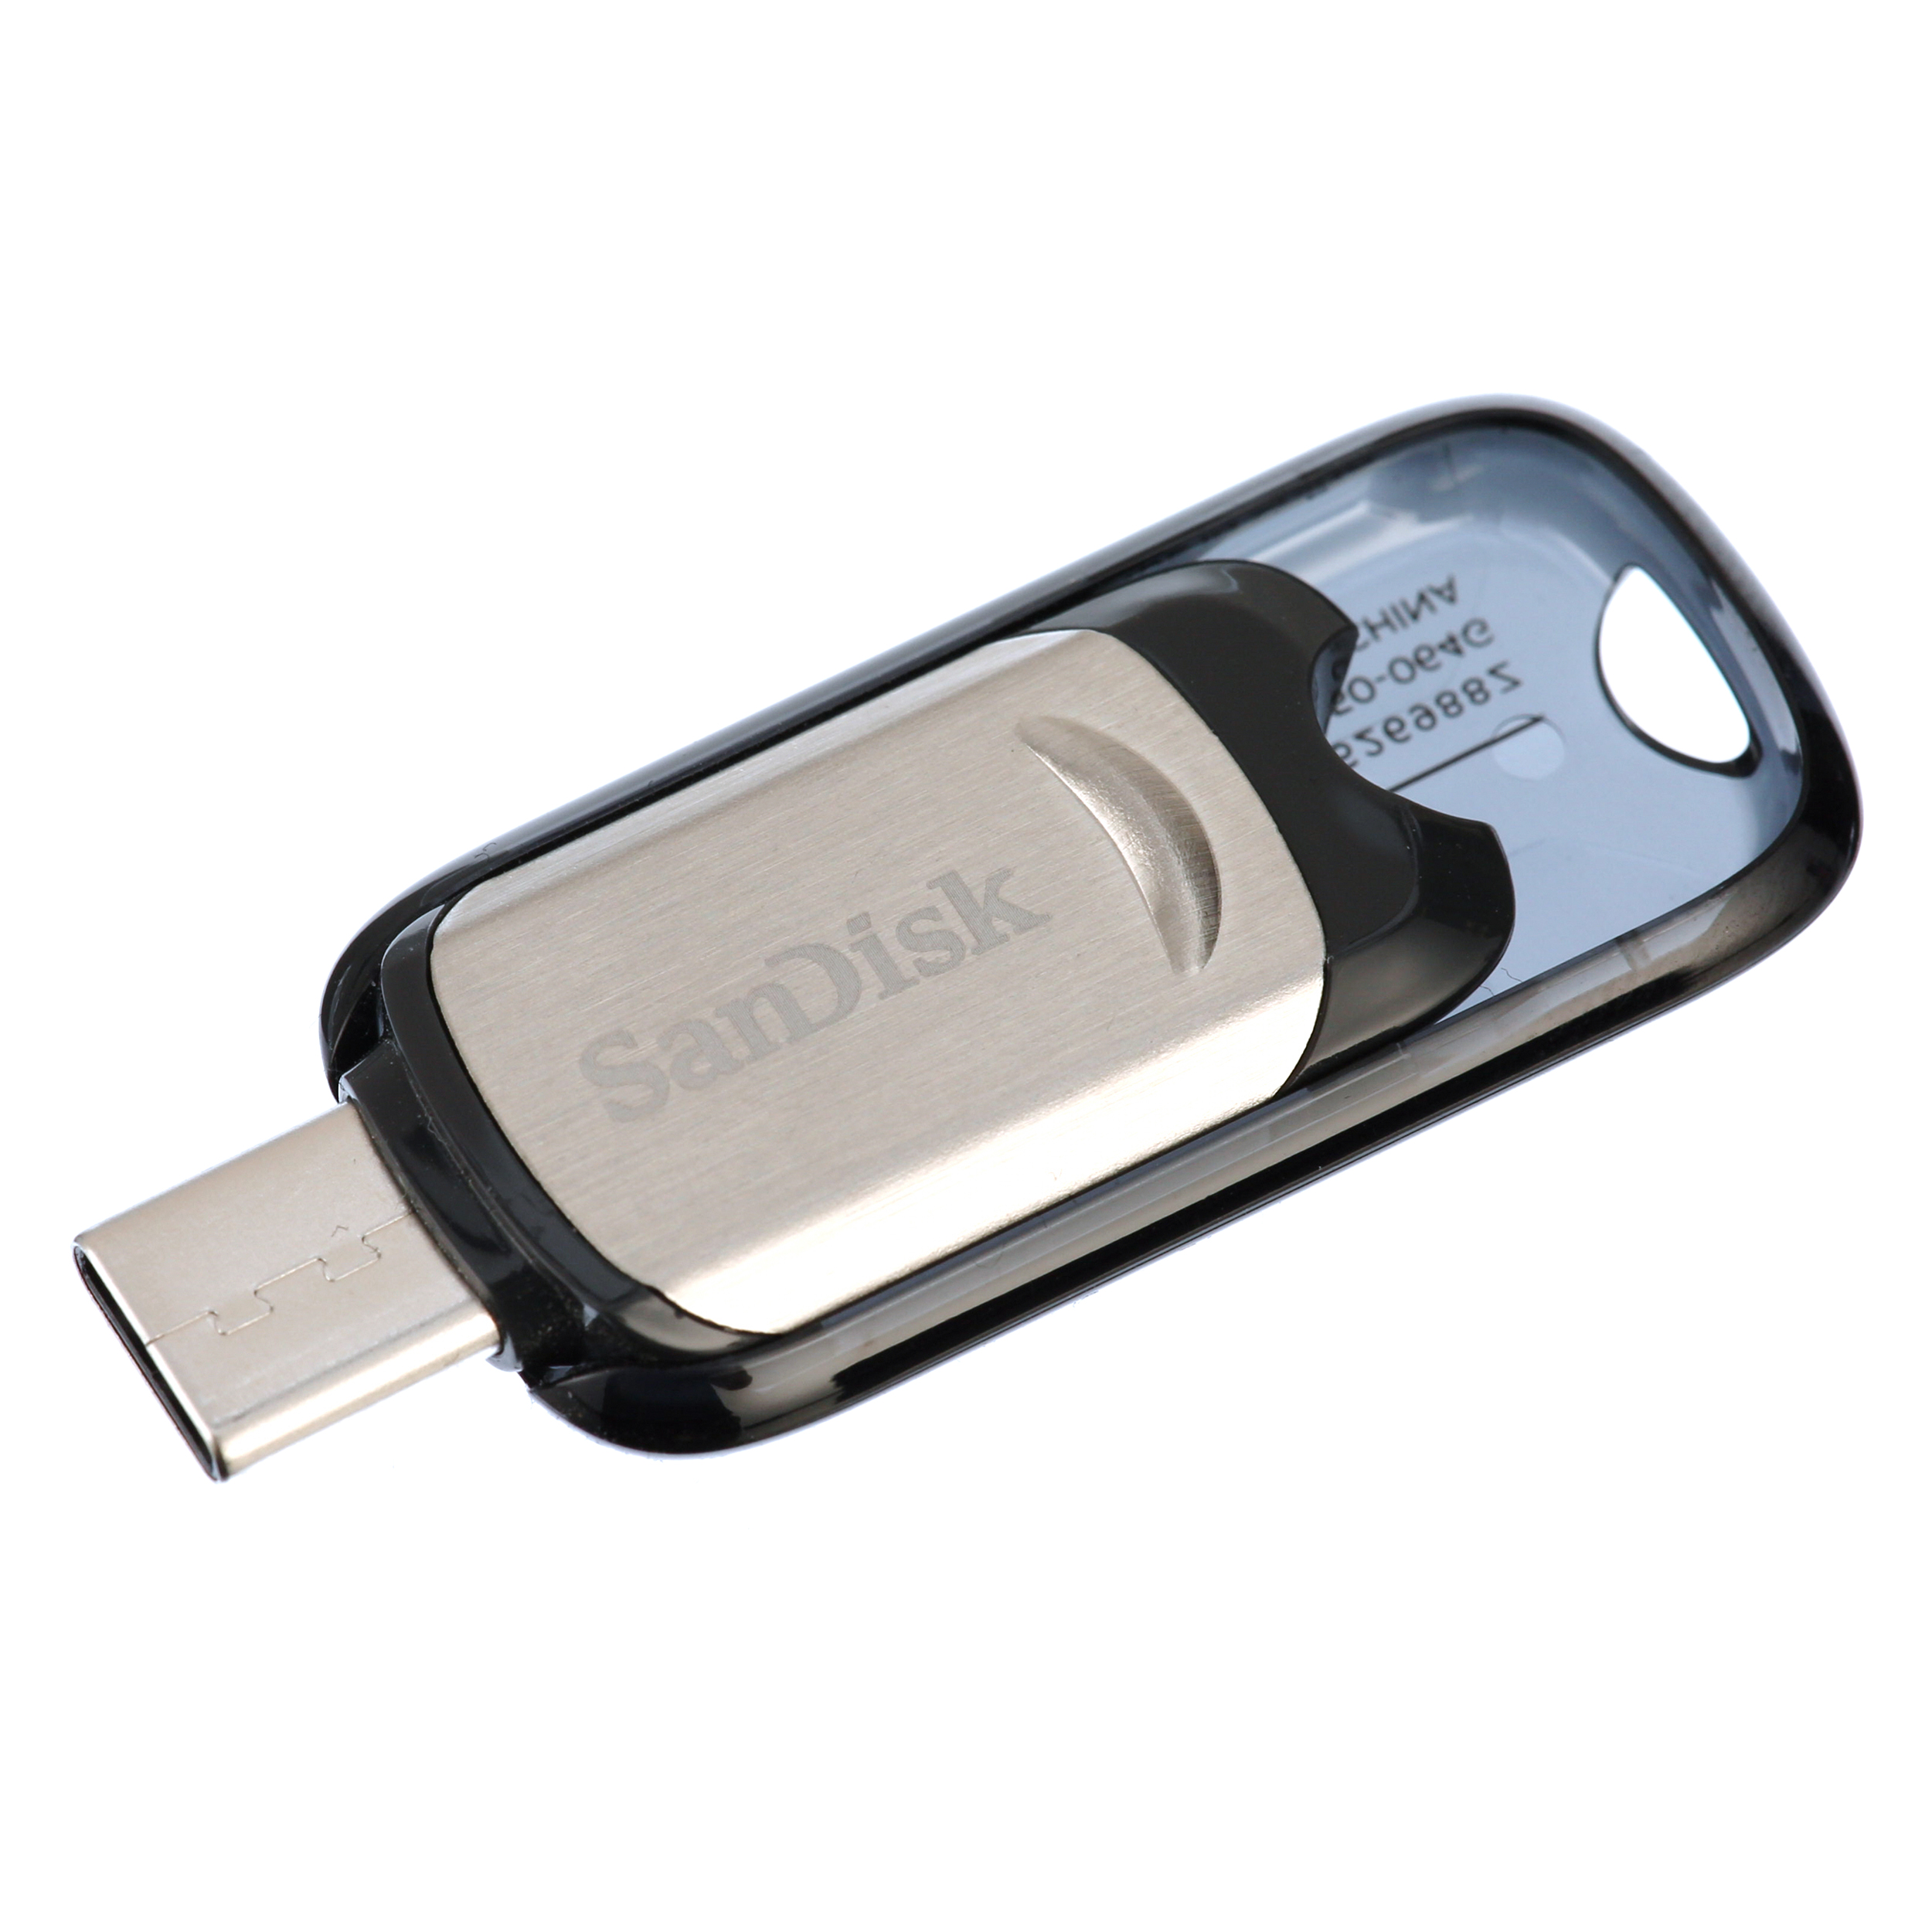 SanDisk Ultra USB Type-C 64GB Flash Drive (SDCZ450-064G-G46) - image 5 of 5